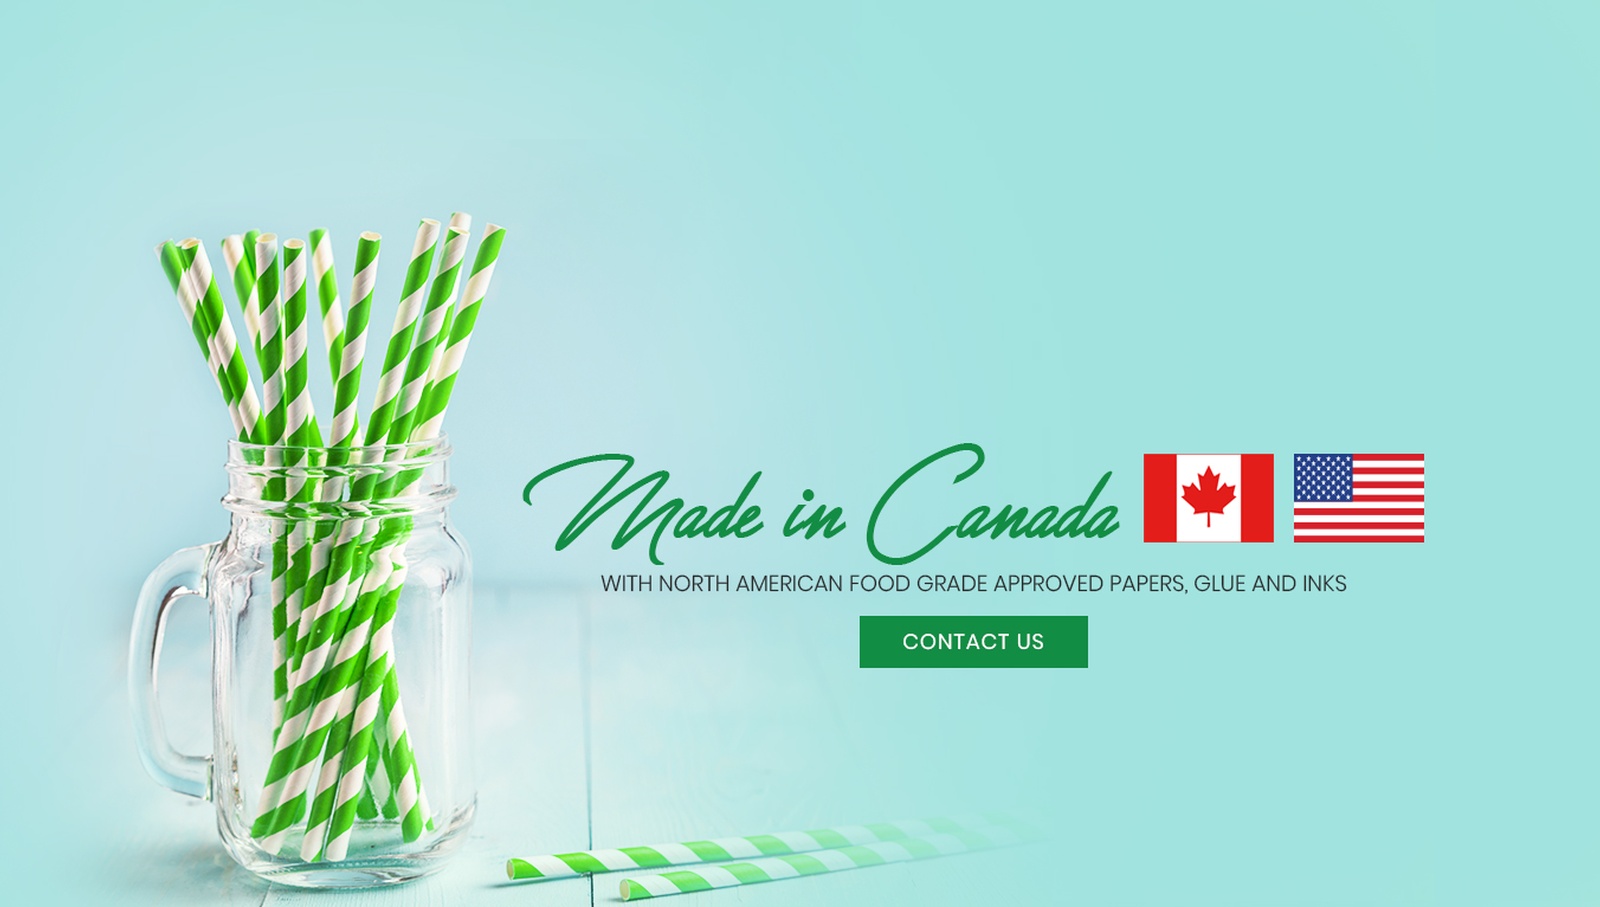 Future Care Packaging Inc. Manufactures Eco-Friendly and Biodegradable Paper Straws for Canada and USA